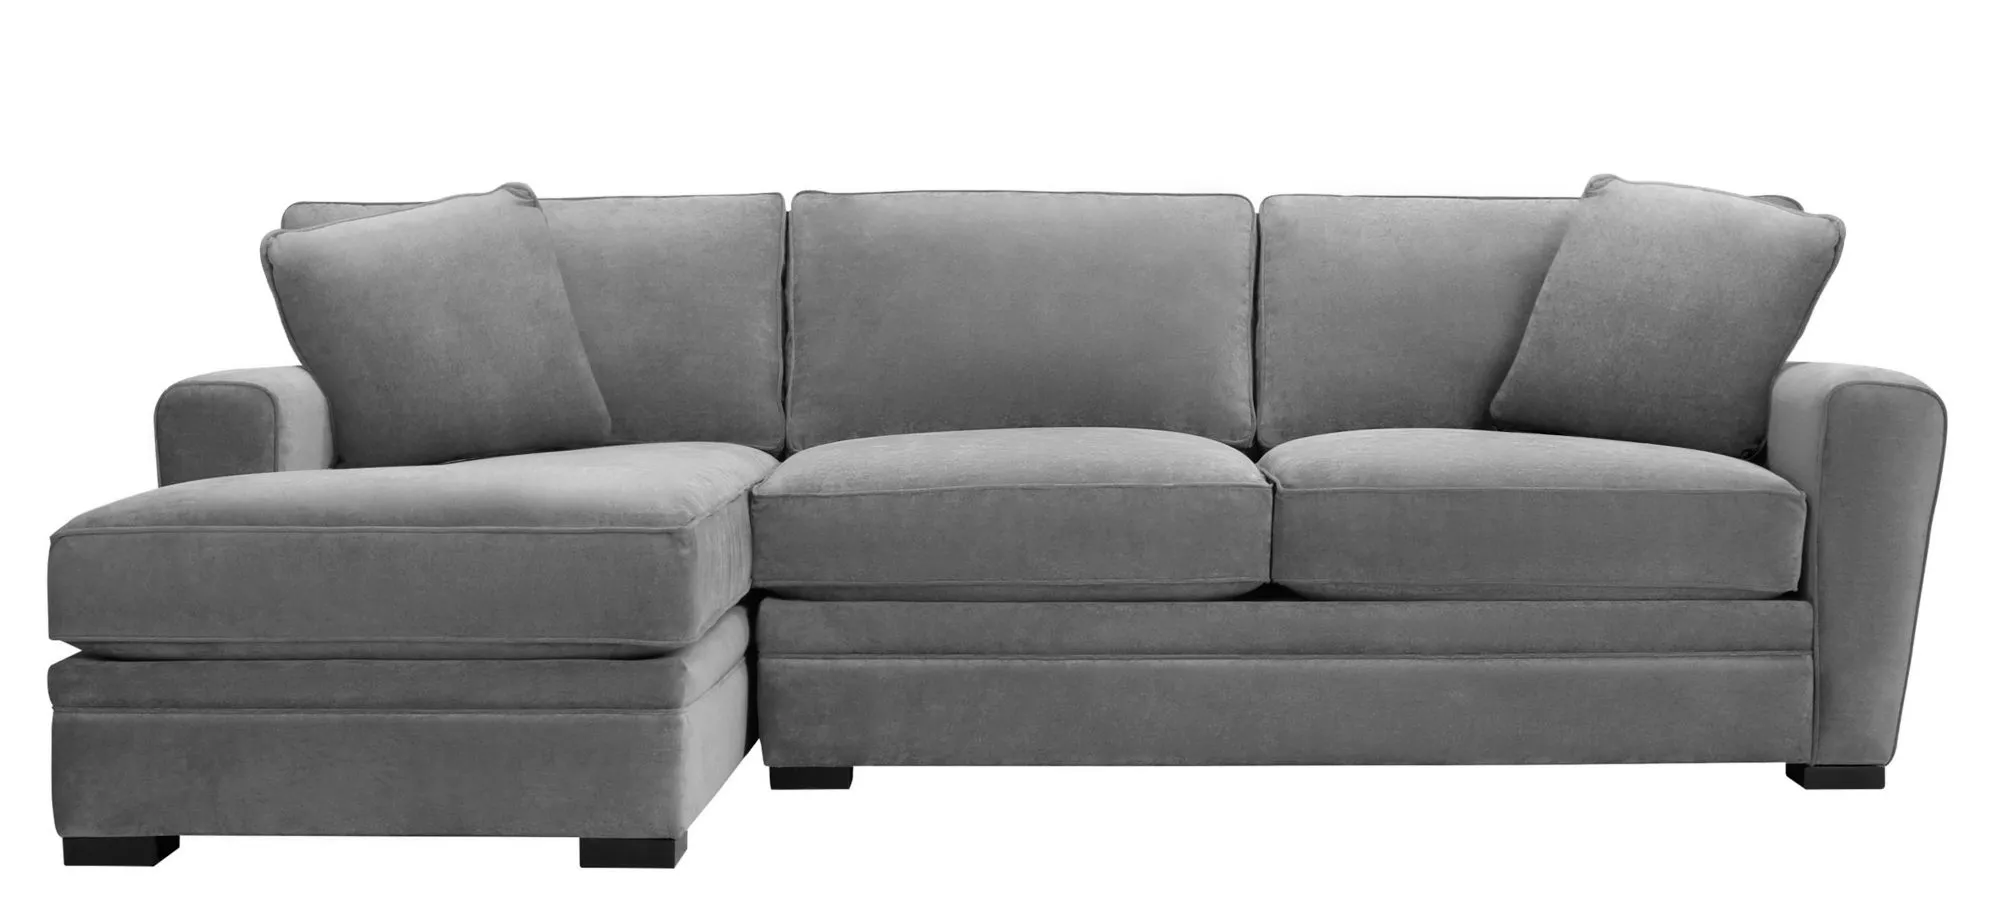 Artemis II 2-pc. Left Hand Facing Sectional Sofa in Gypsy Smoked Pearl by Jonathan Louis